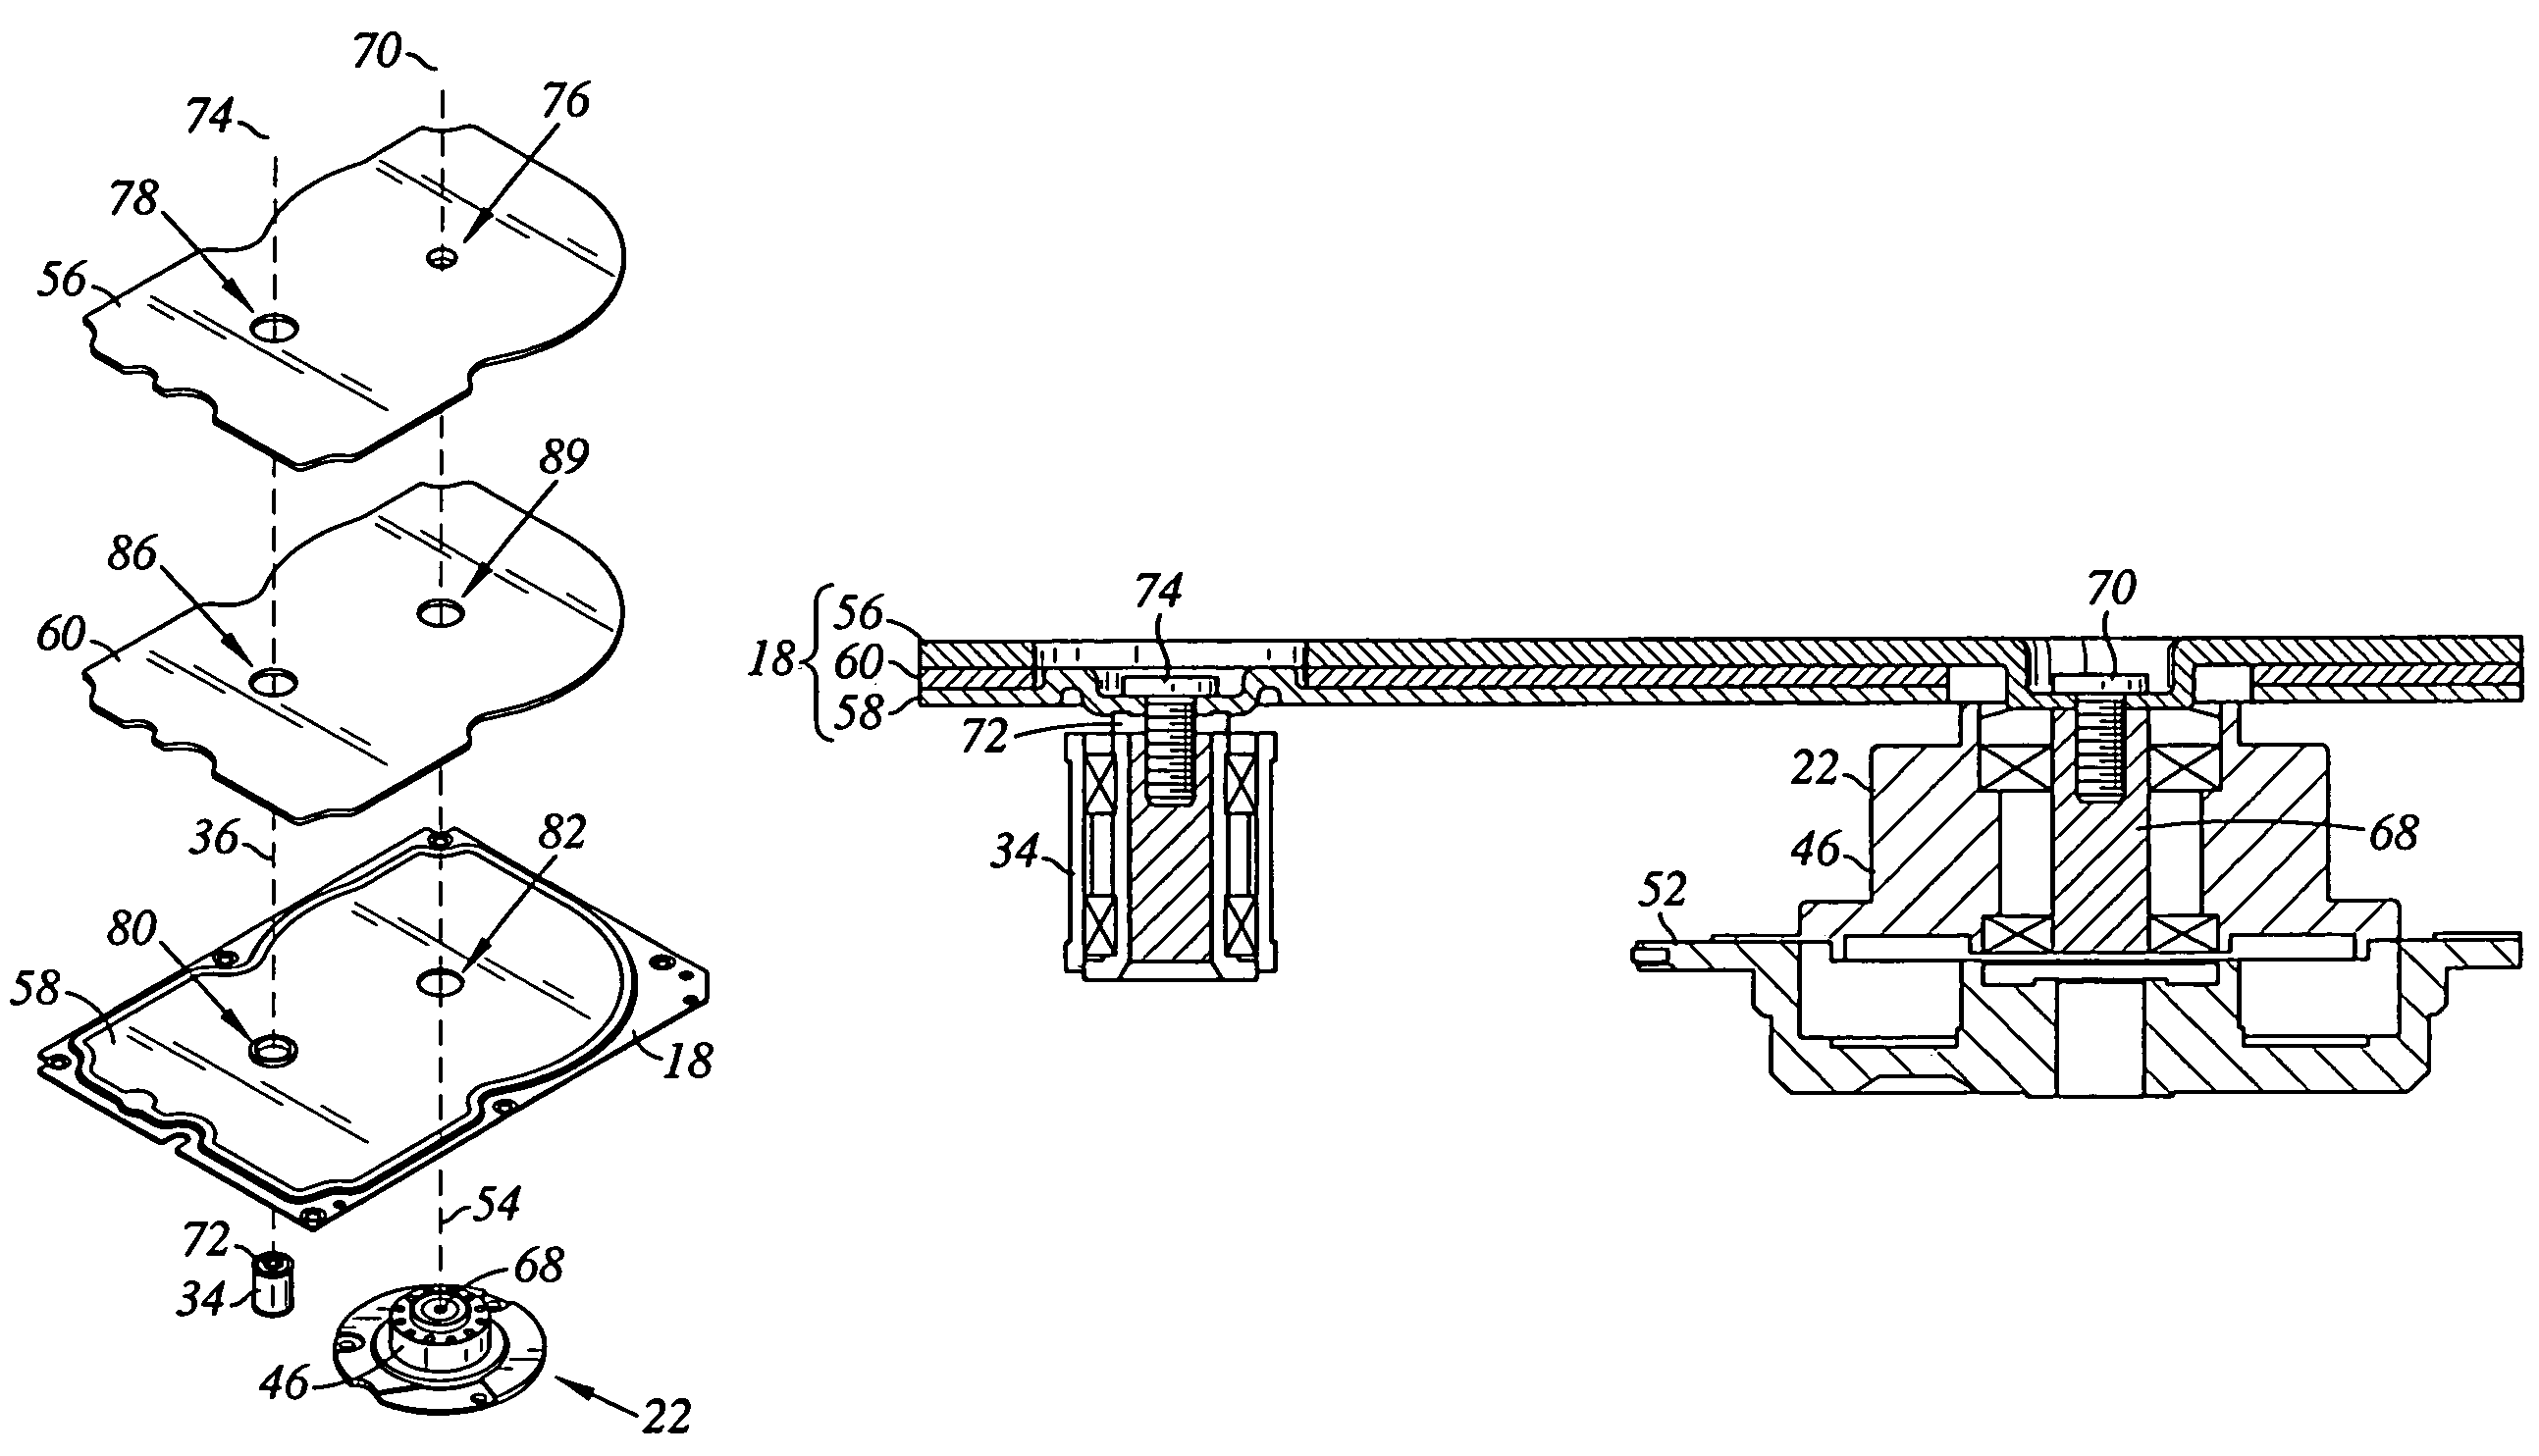 Disk drive including a spindle motor and a pivot bearing cartridge attached to different layers of a laminated cover